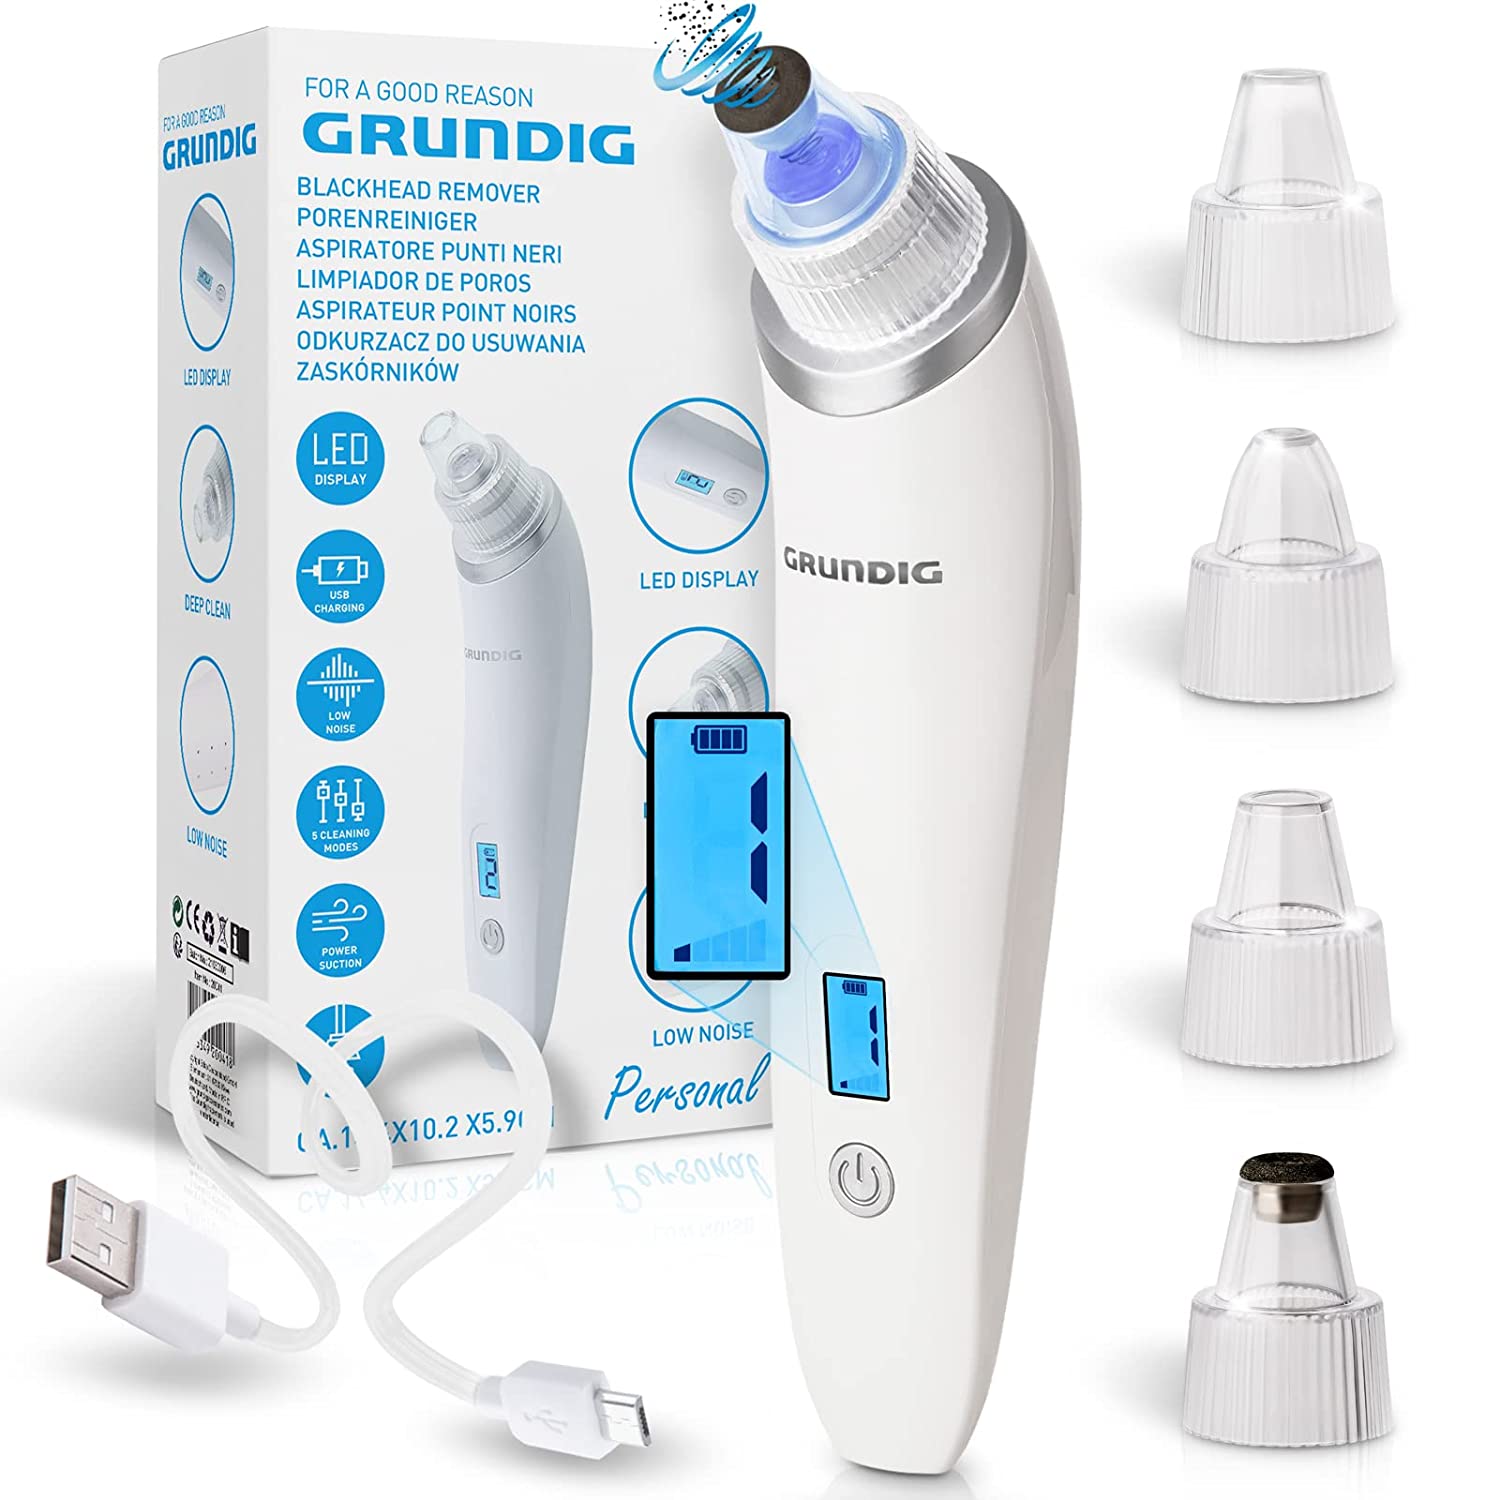 GRUNDIG Pore Cleaner, Blackhead Remover, Blackhead Removal, Battery Pore Vacuum Cleaner with 5 Action Levels, Hygiene Filter and 4 Professional Suction Care Attachments, Blackhead Remover (Device), ‎white